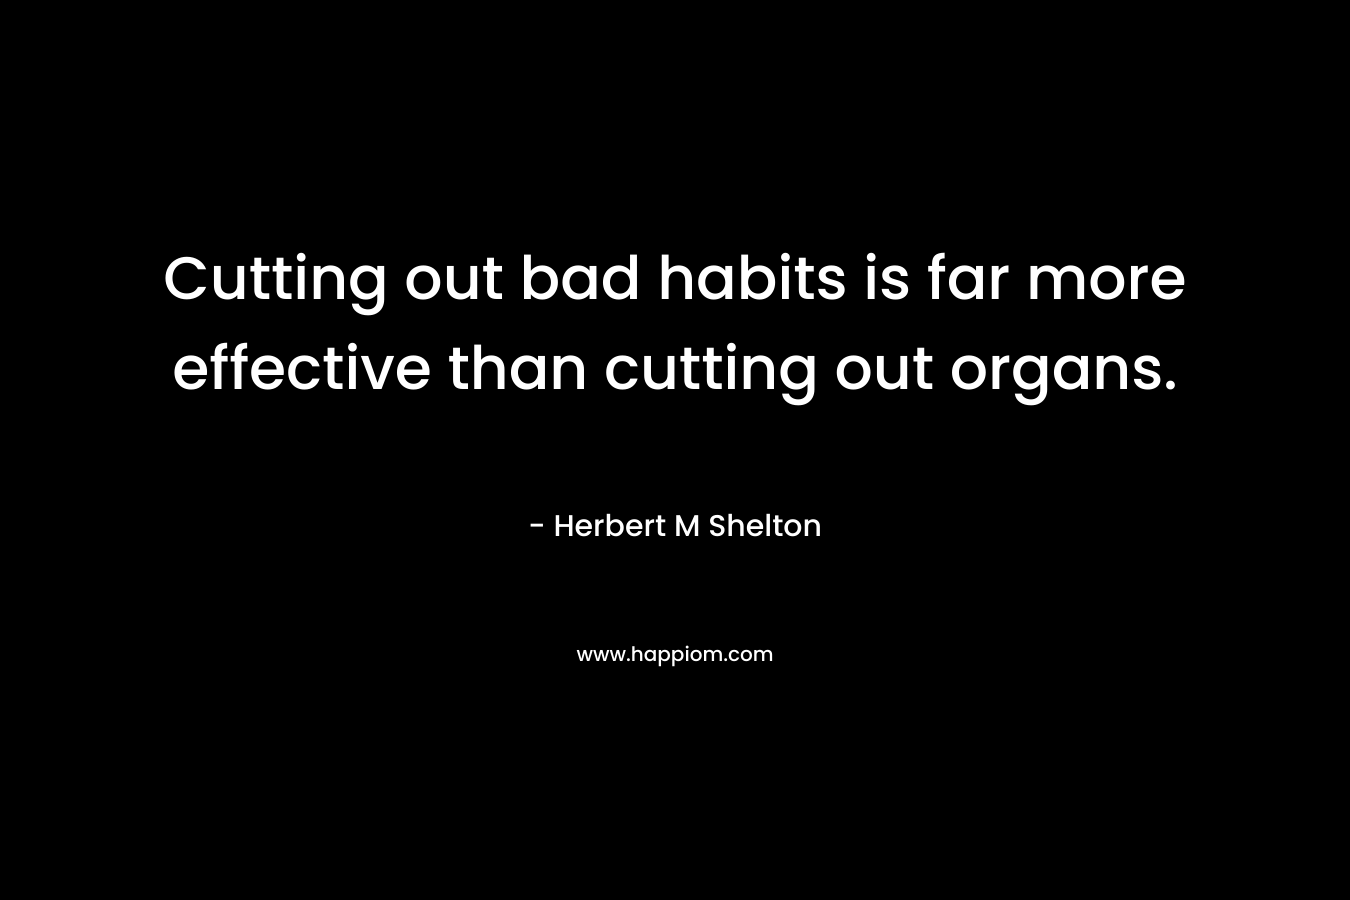 Cutting out bad habits is far more effective than cutting out organs.